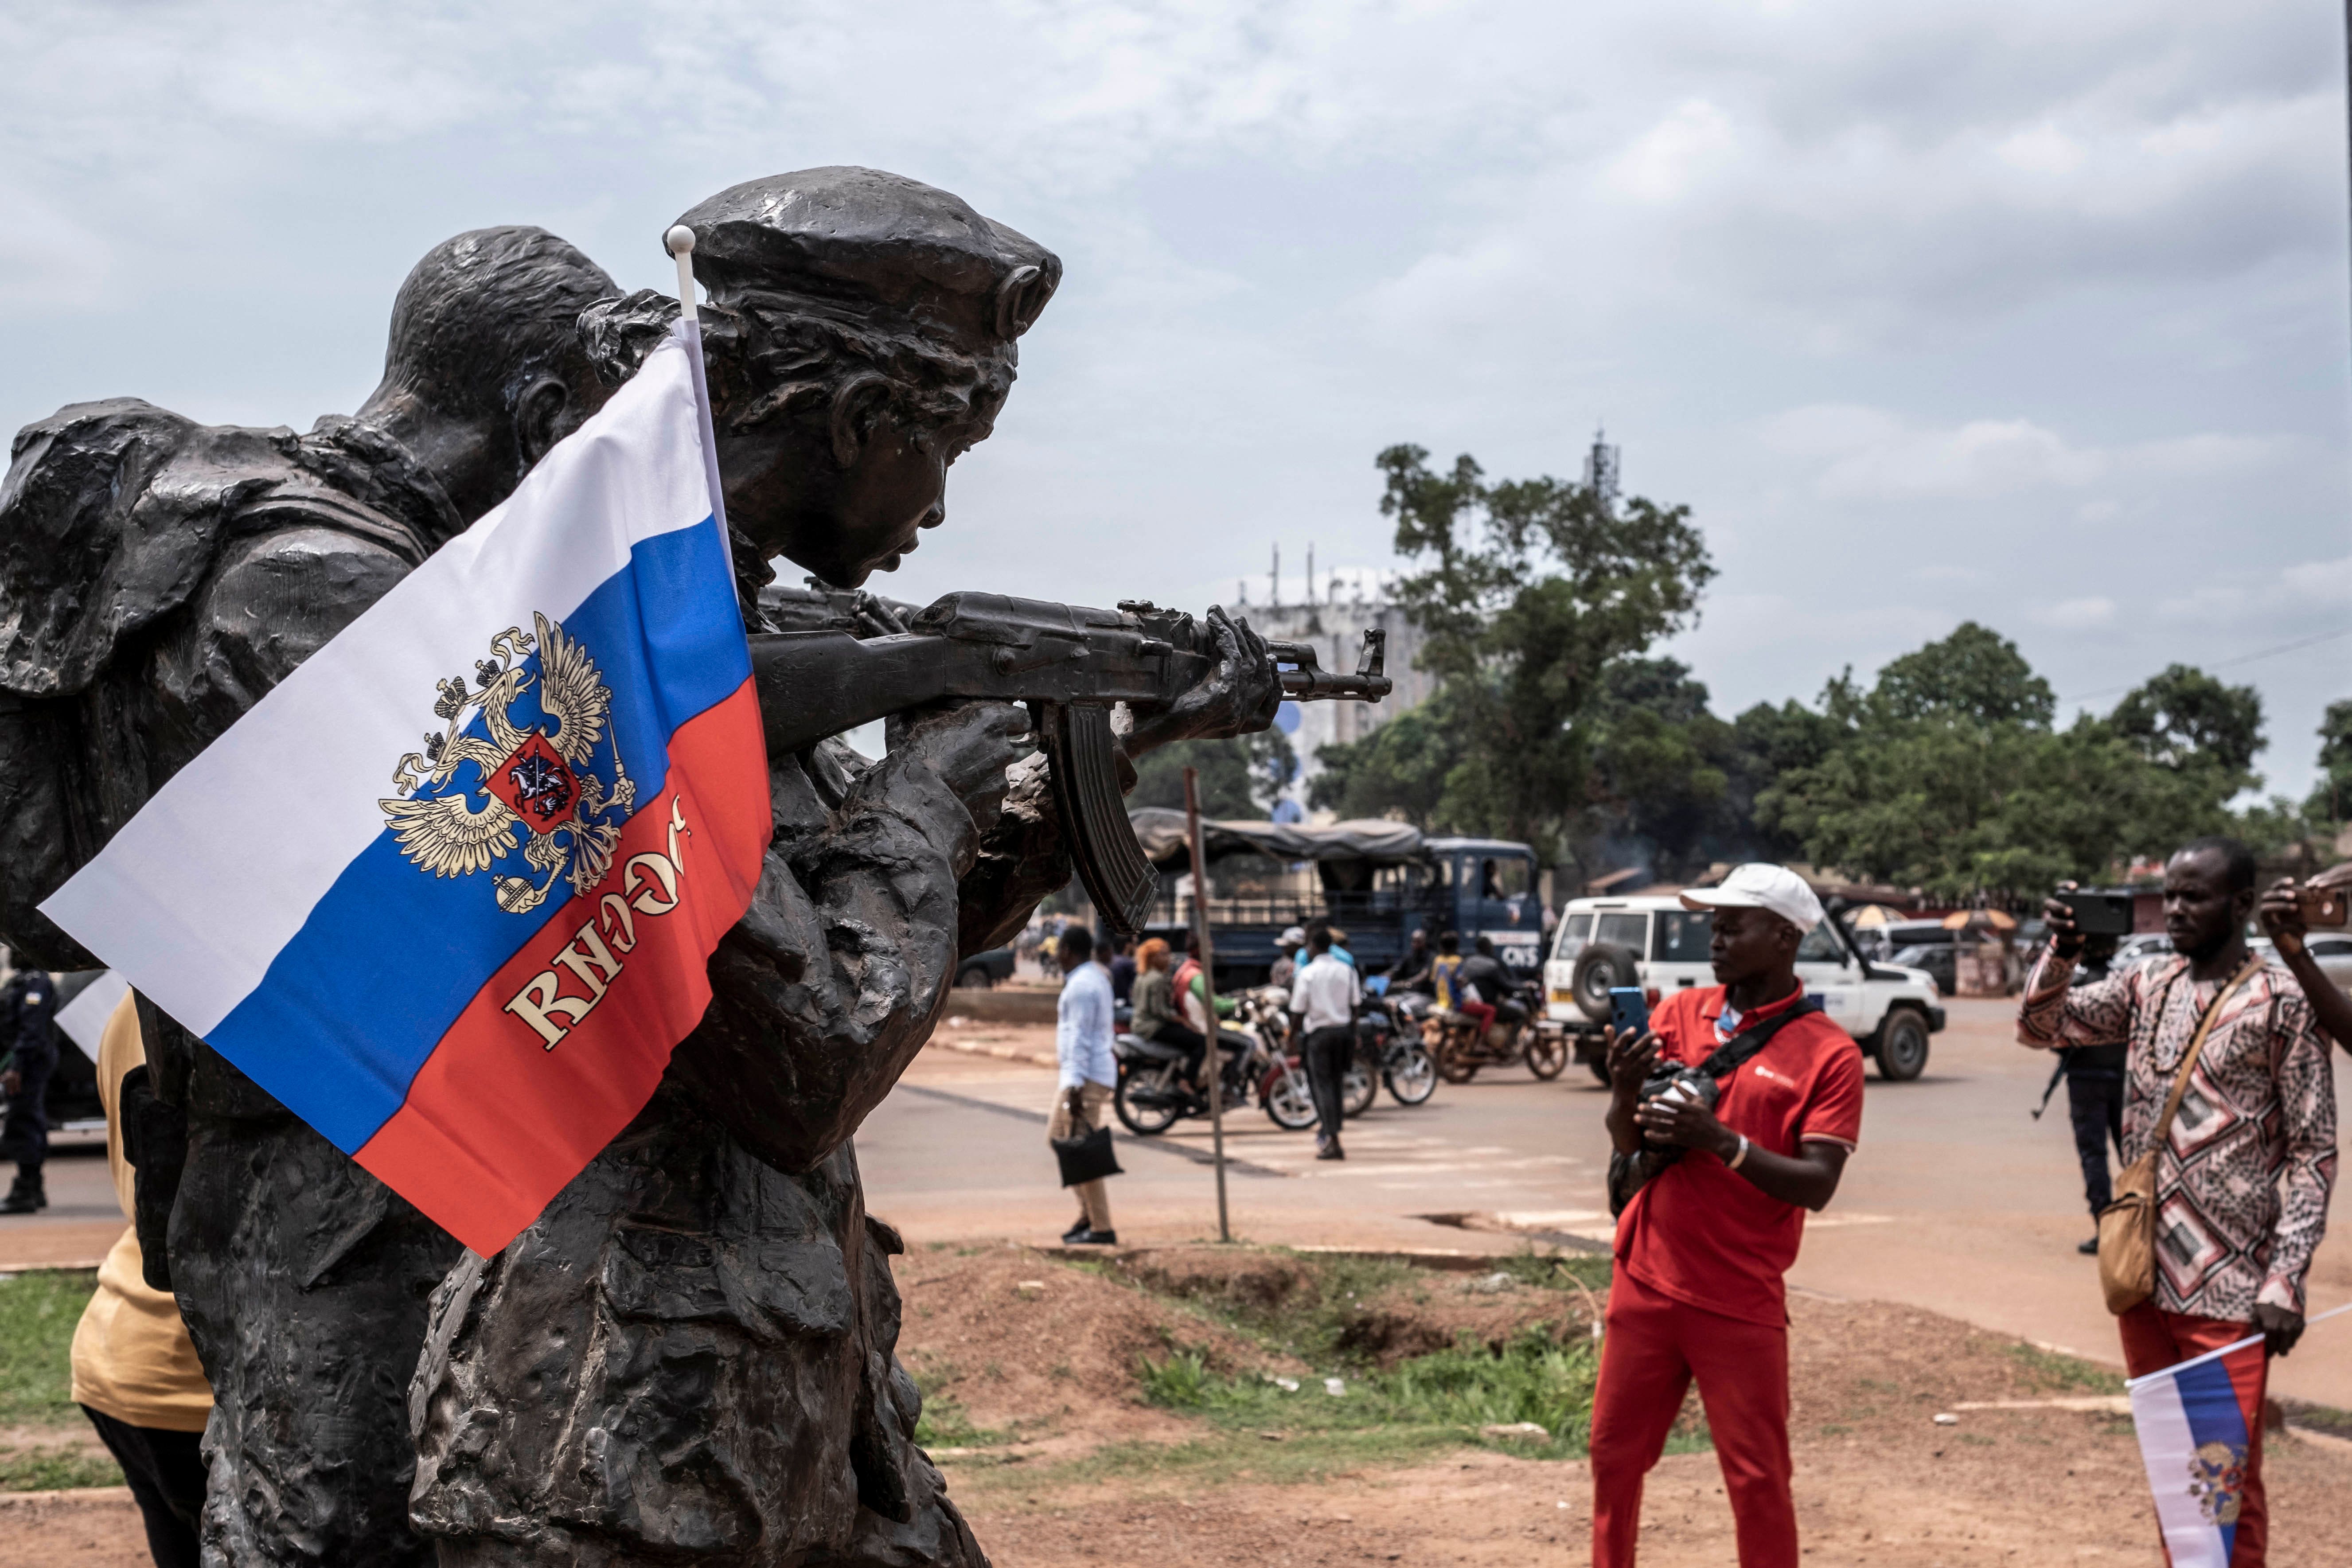 Russian warlord expands activity in Africa on Moscow’s behalf, creating foothold in vital region